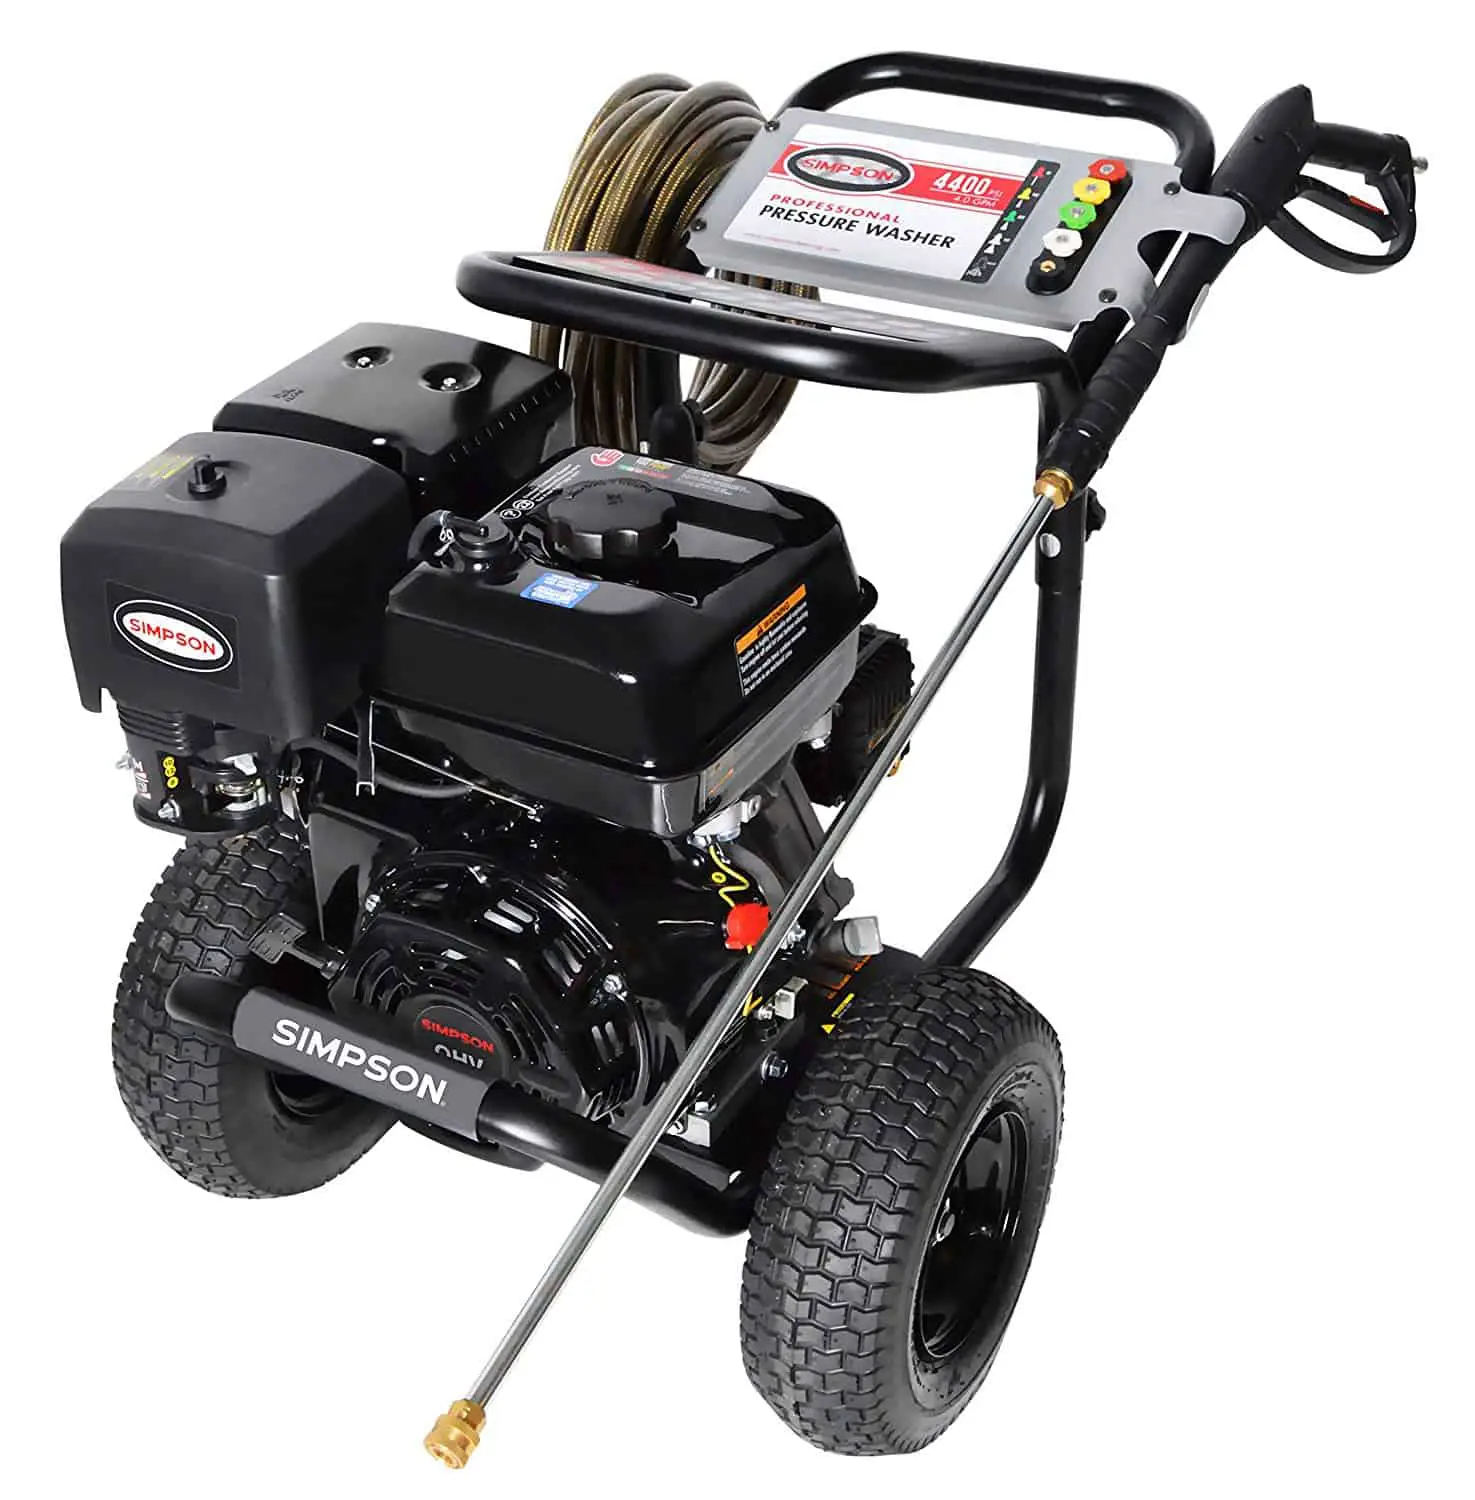 Simpson Cleaning 60843 Powershot 4400Psi Gas Pressure Washer